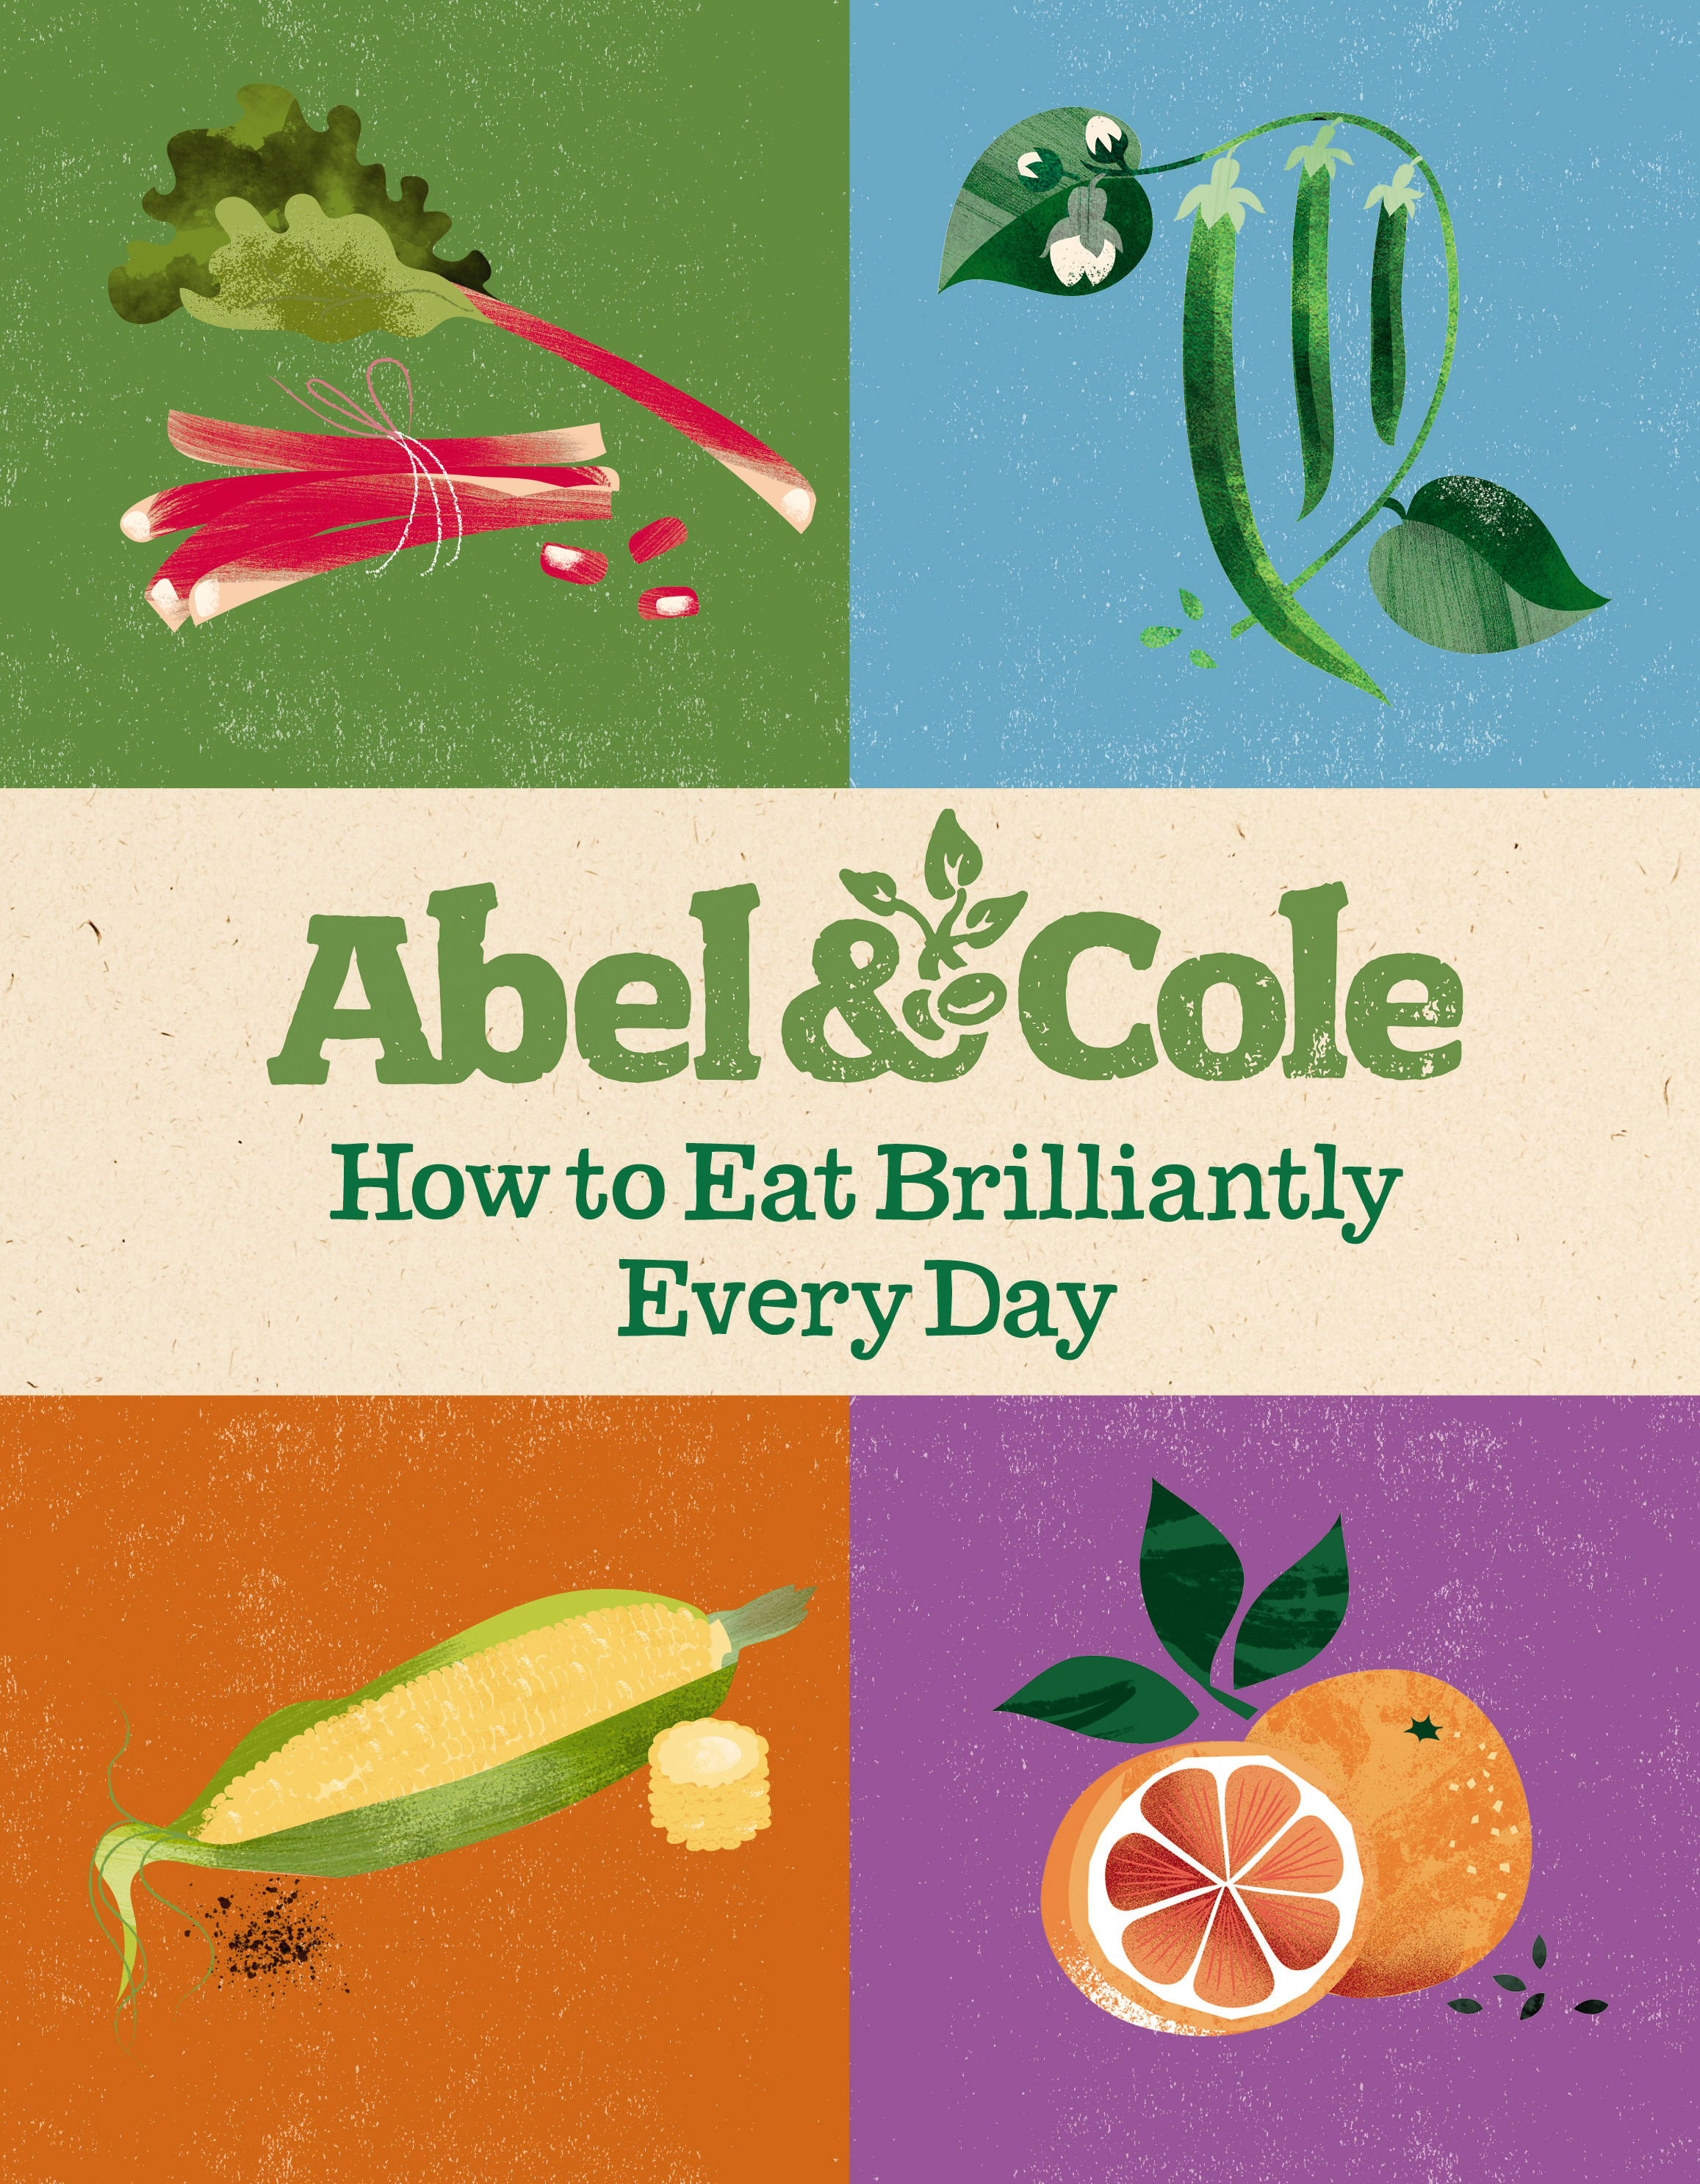 How to Eat Brilliantly Every Day cookbook